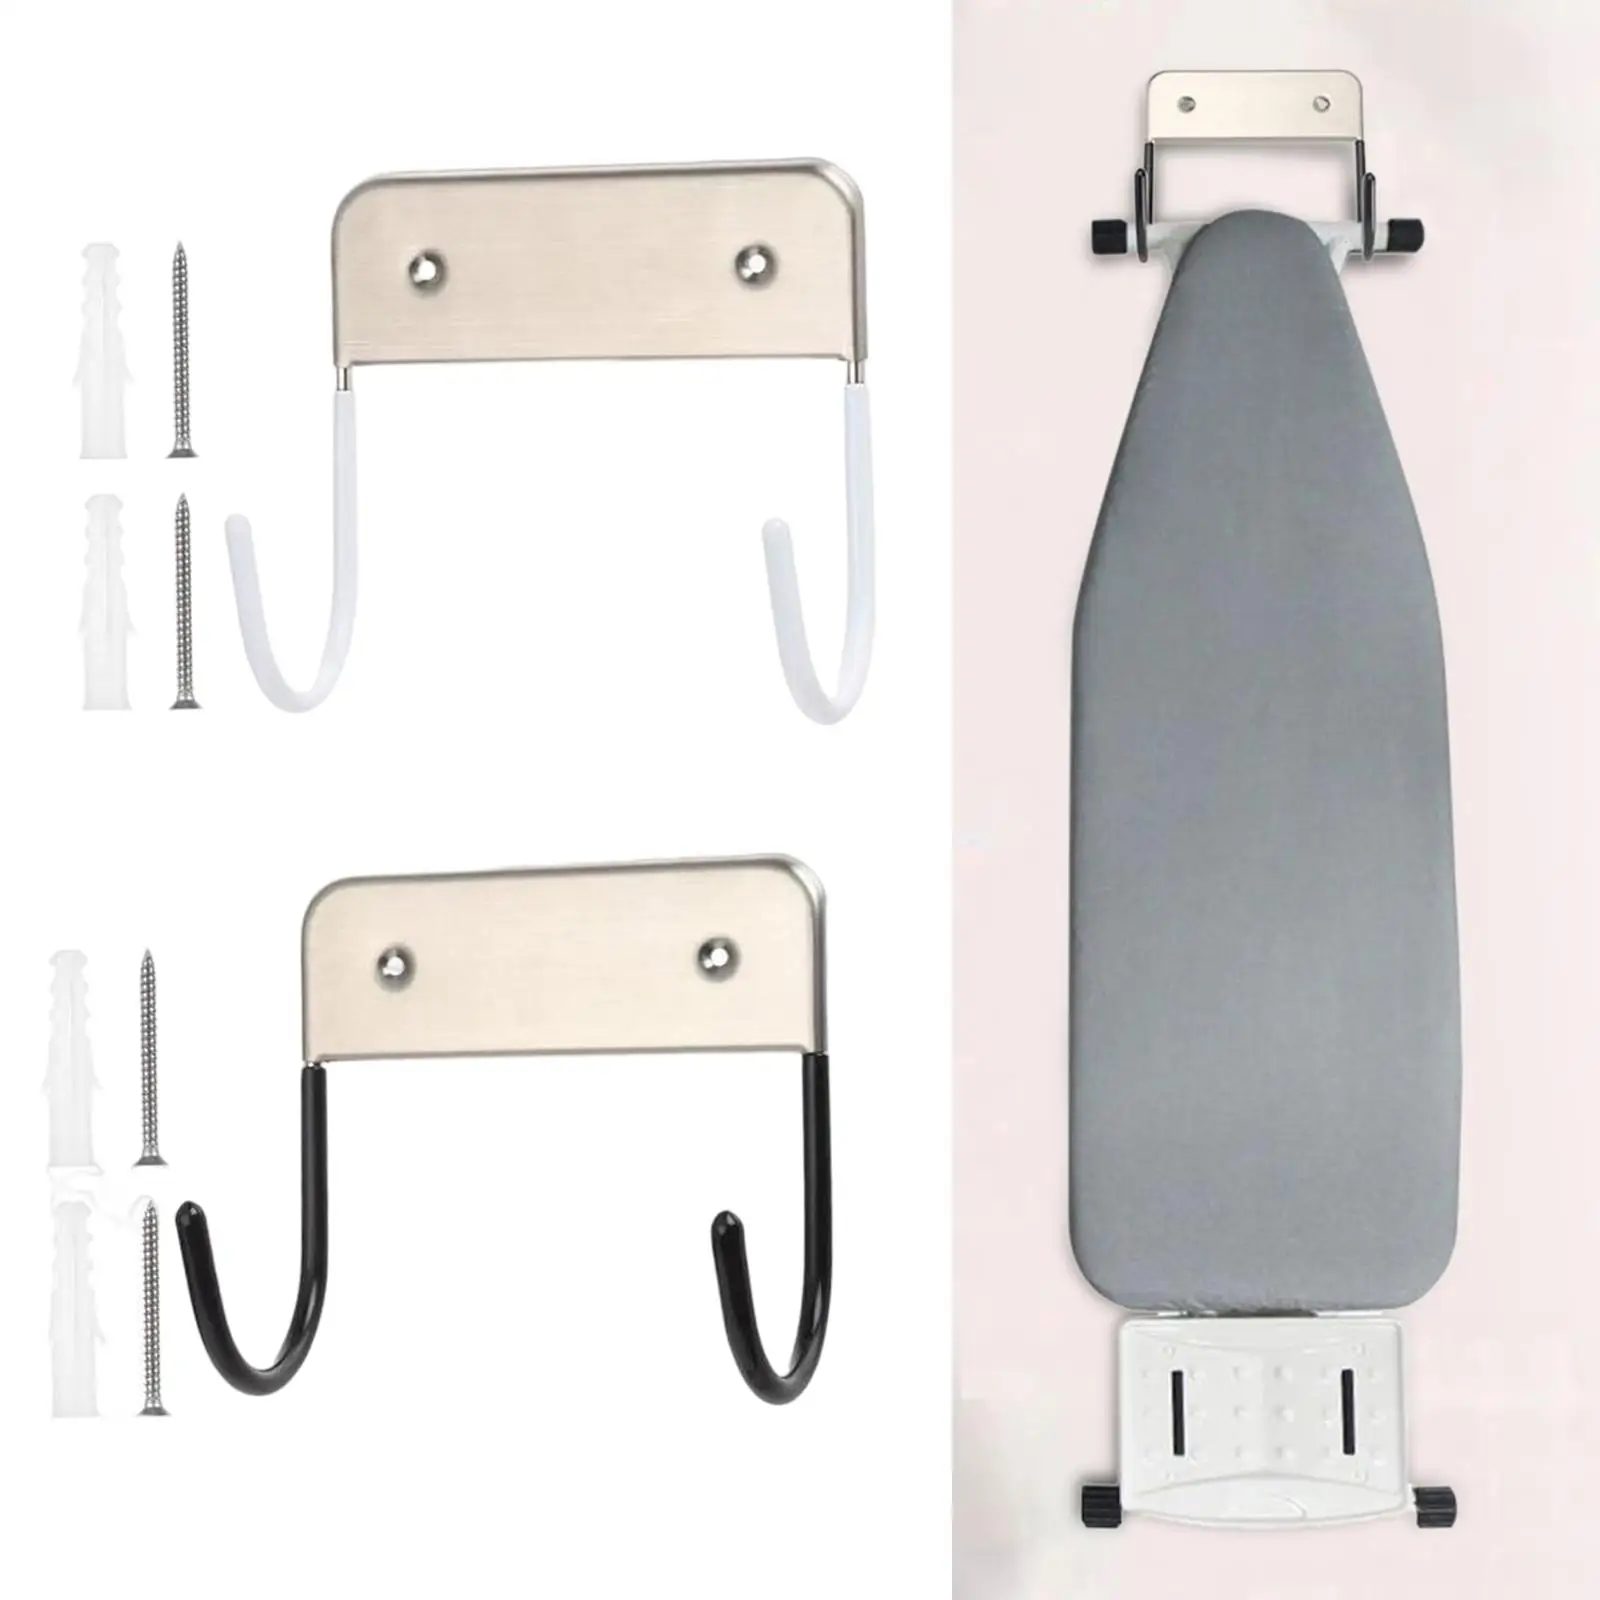 Home Ironing Board Holder Wall Hanging Removable for Home Door